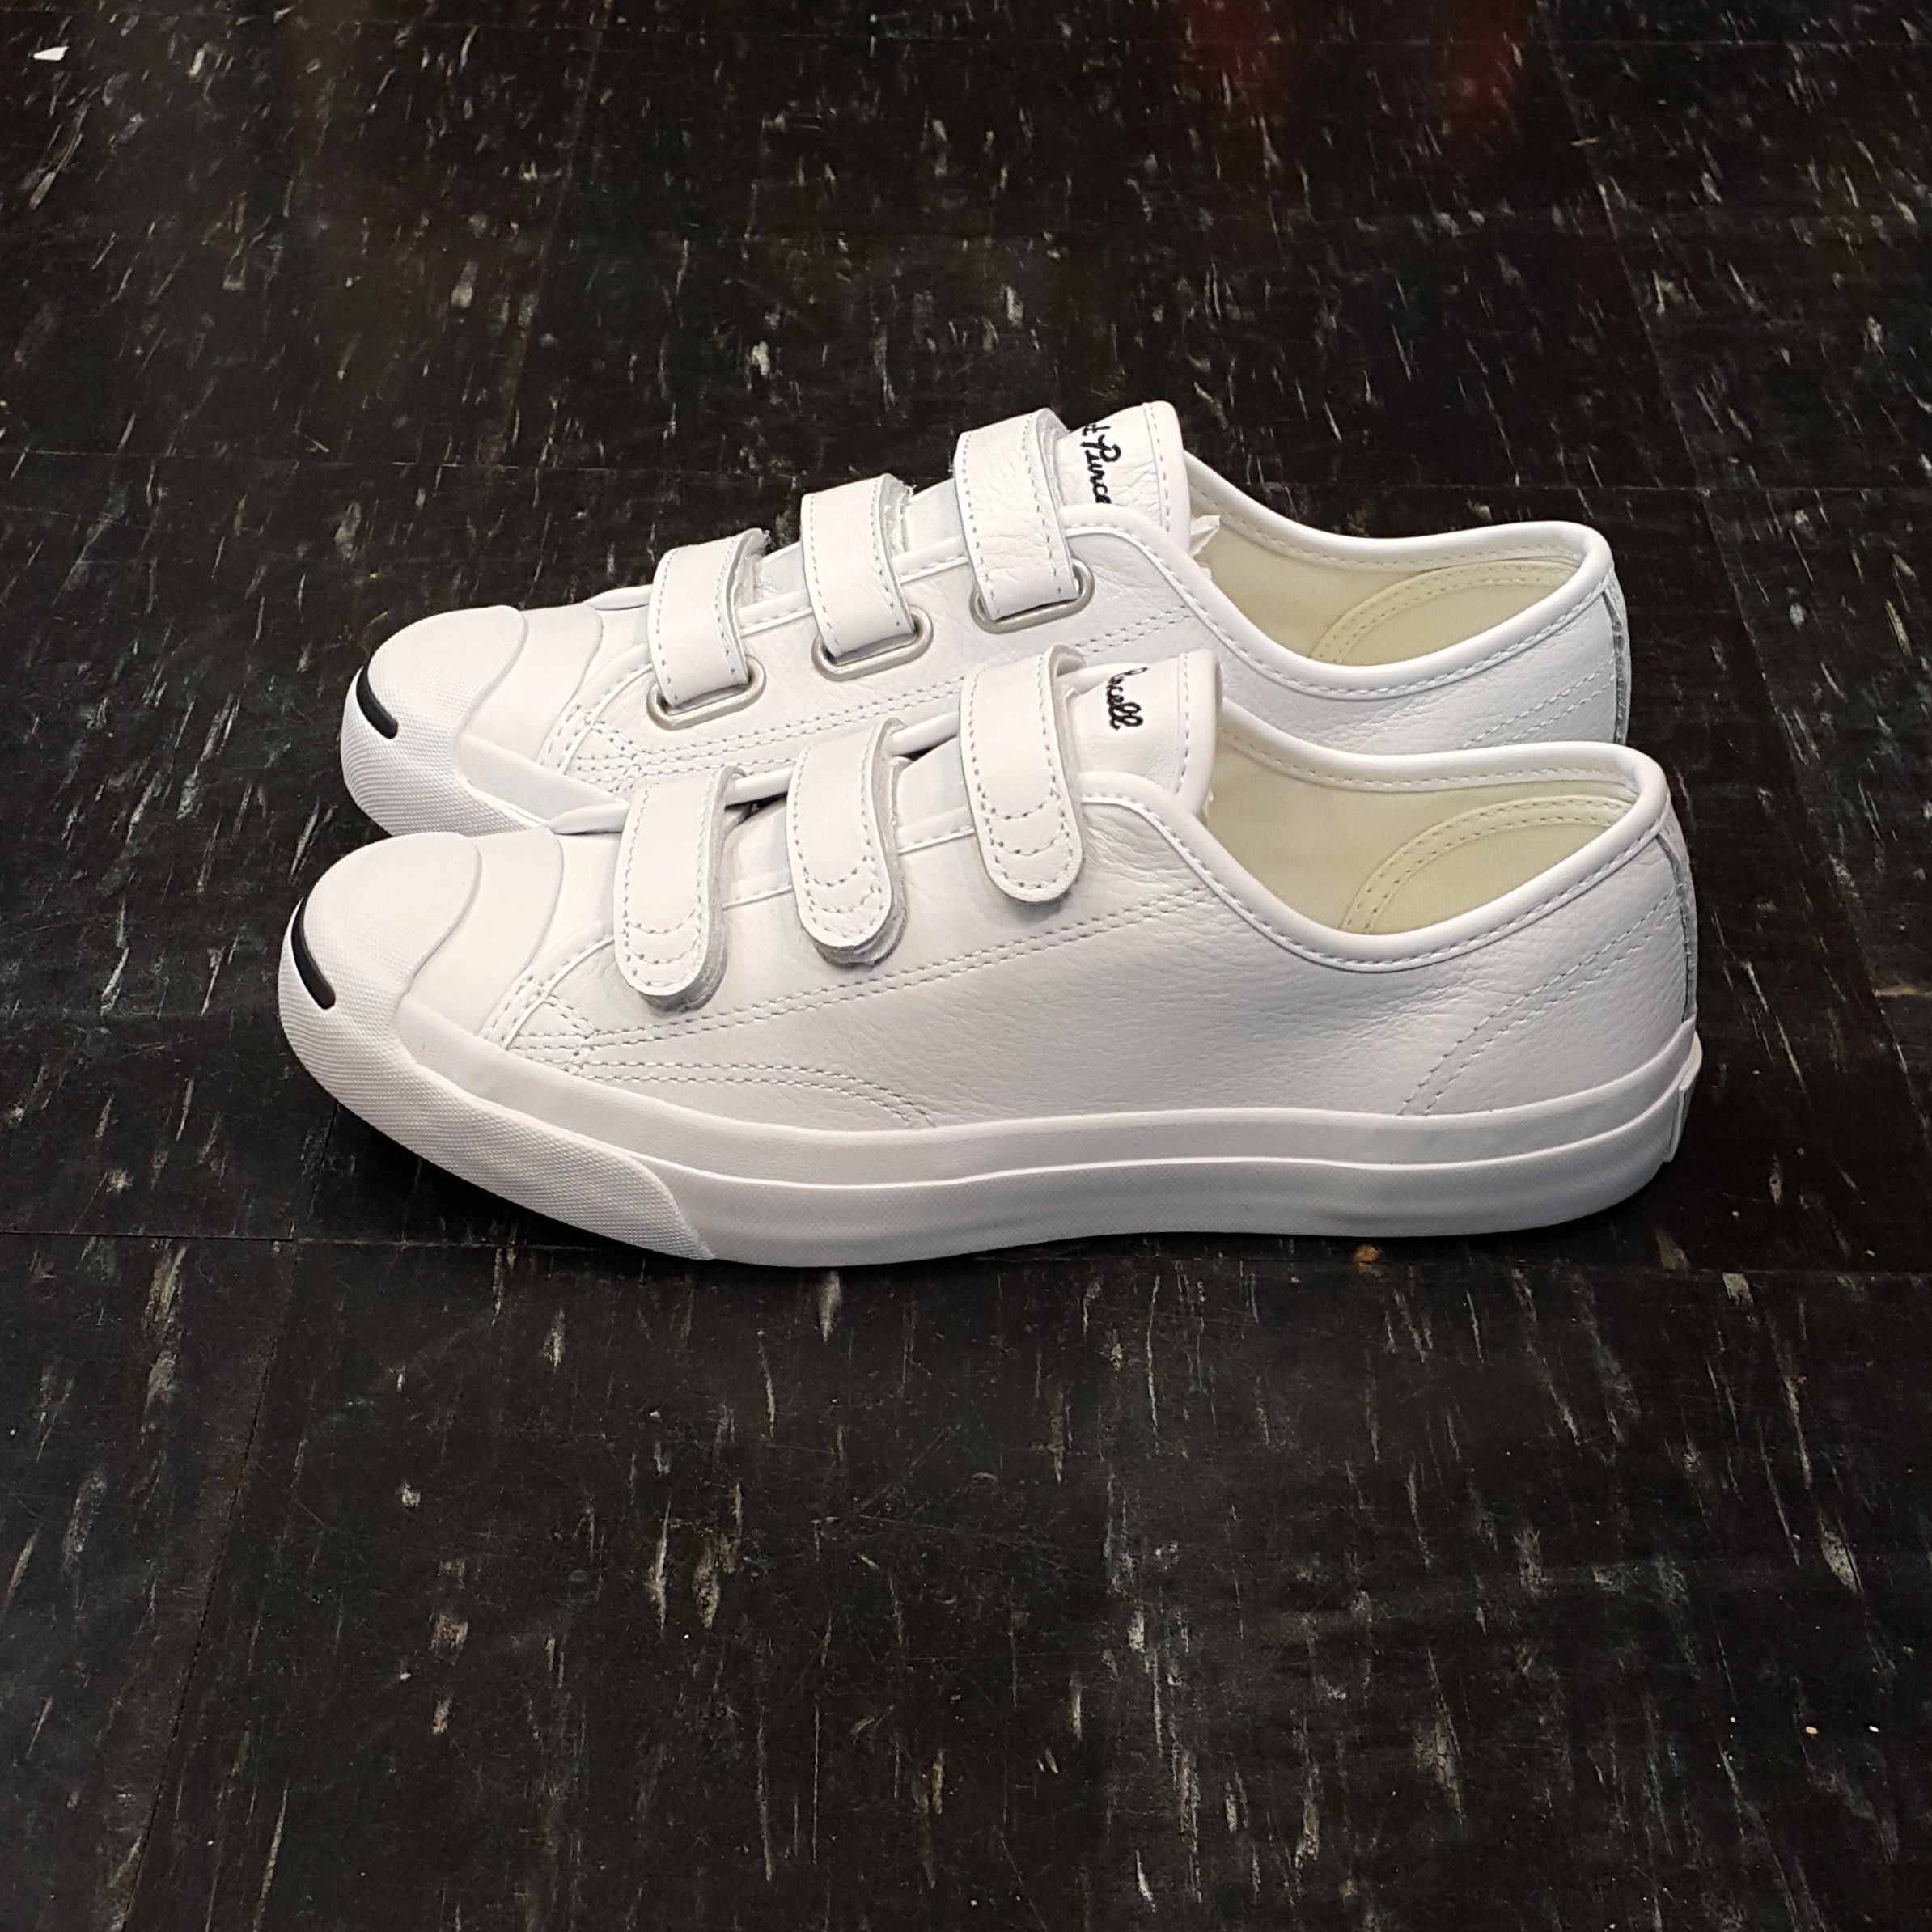 converse jack purcell 3v